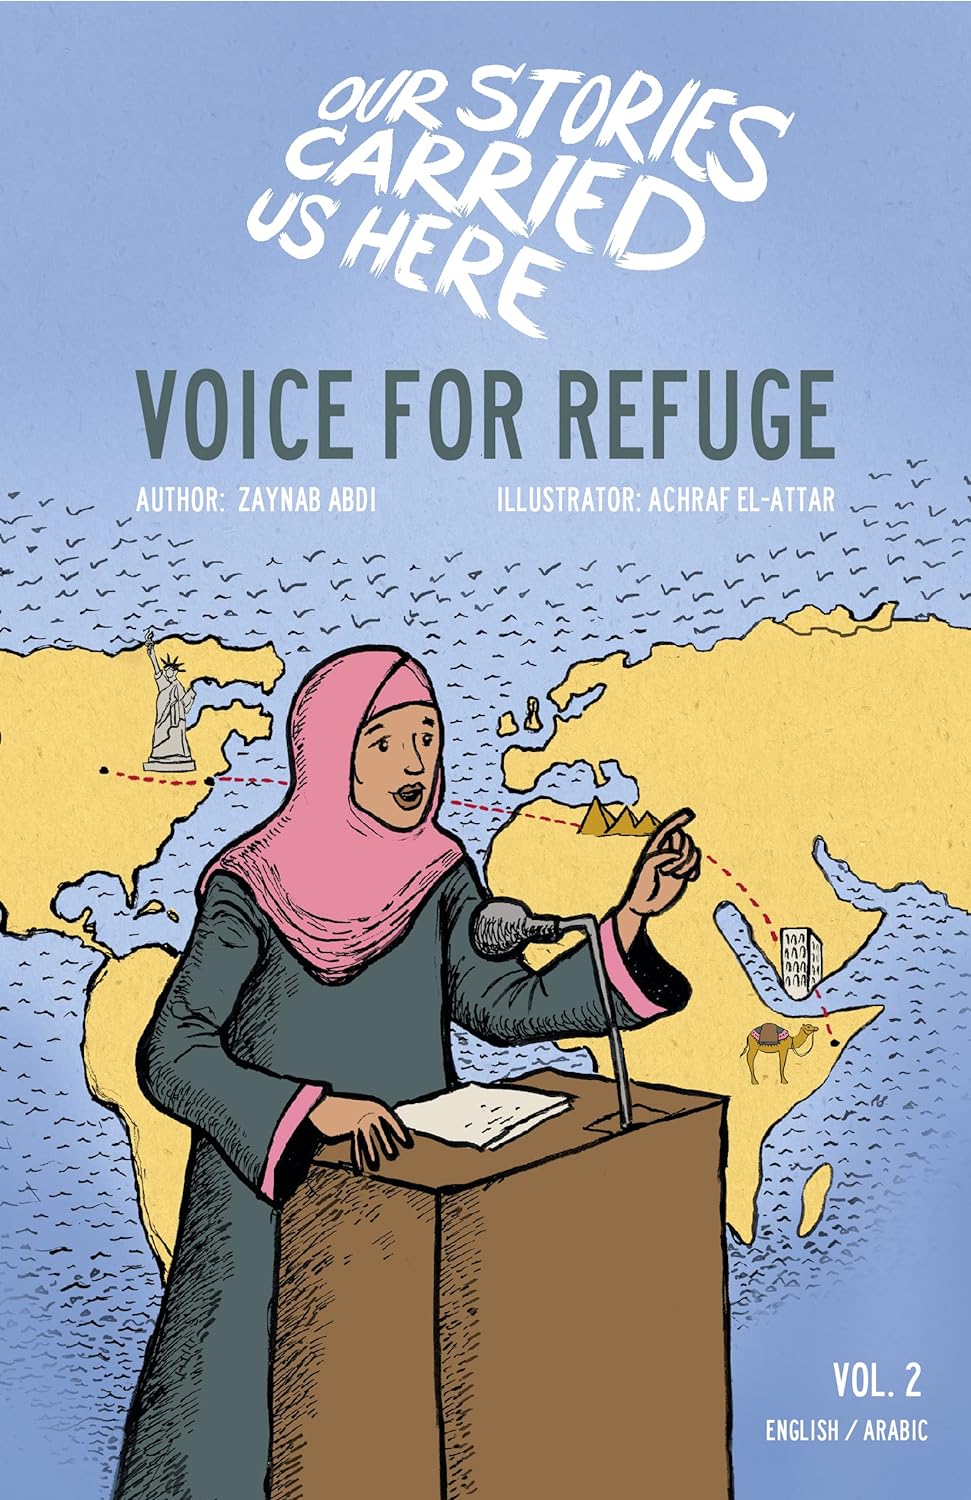 Our Stories Carried Us Here: Voice for Refuge